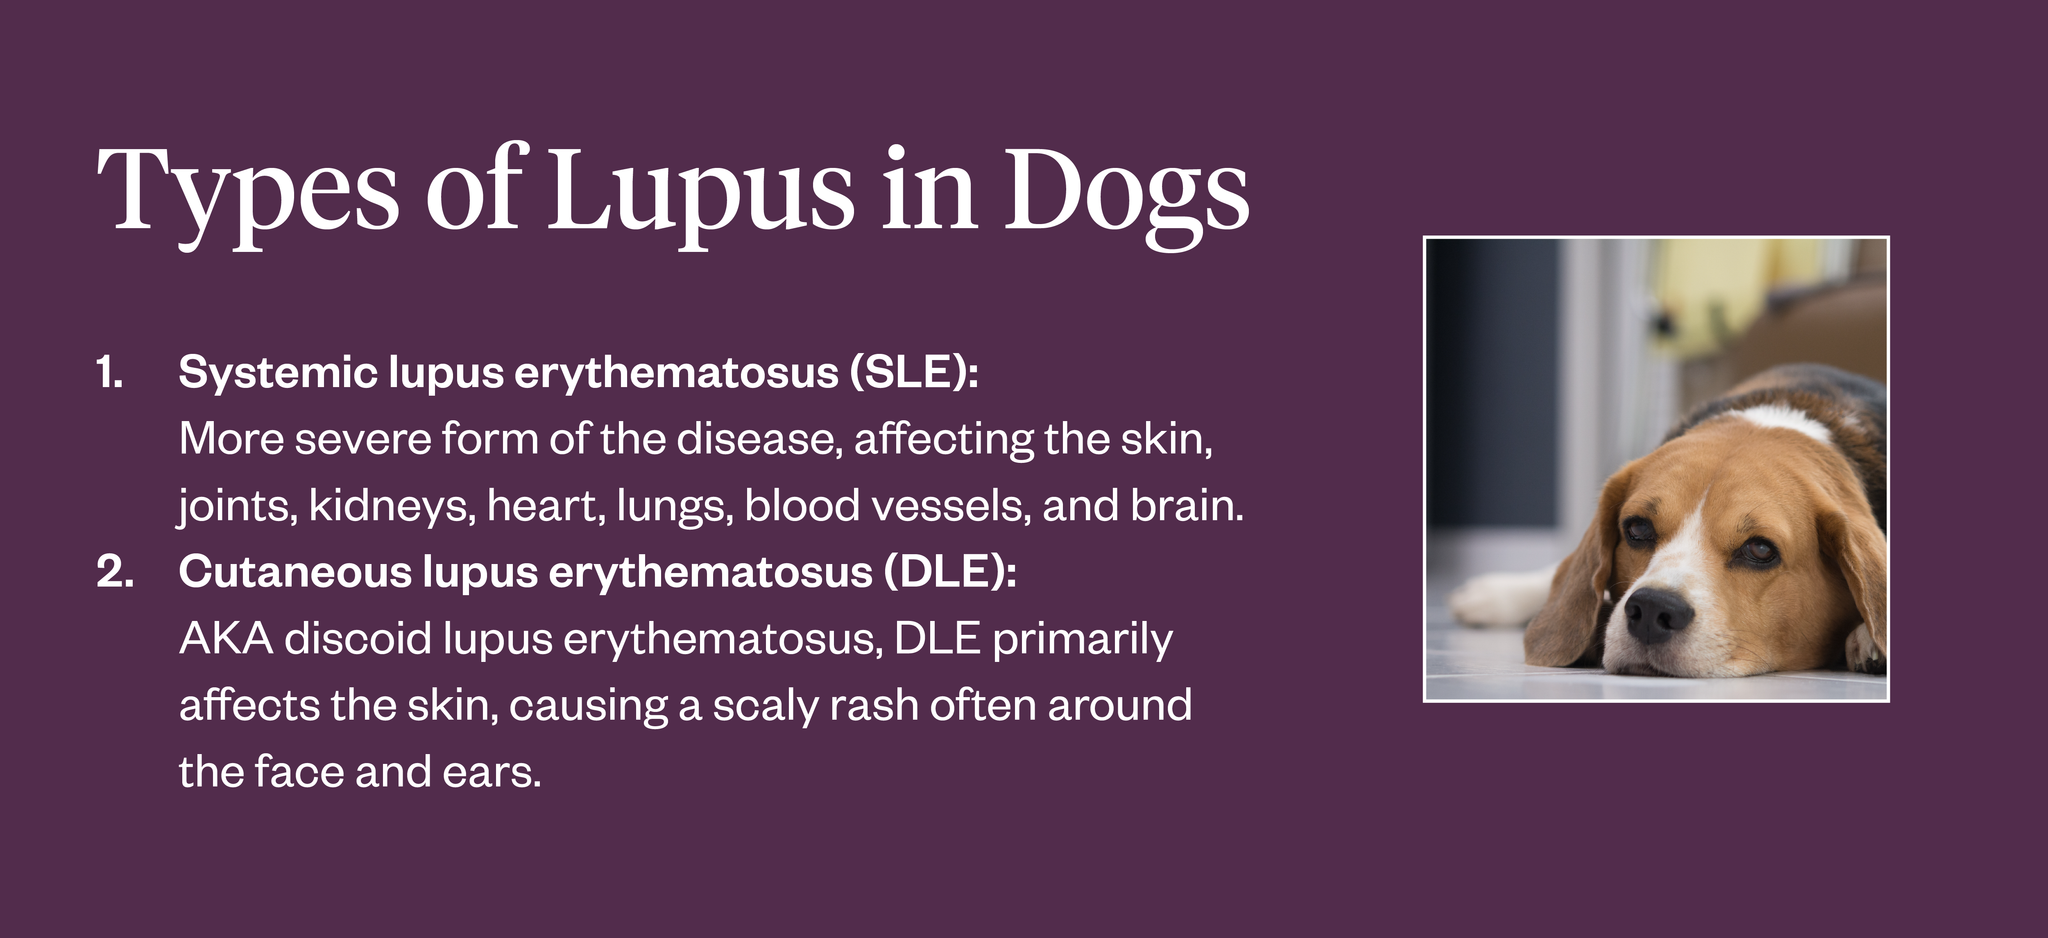 Types of lupus in dogs